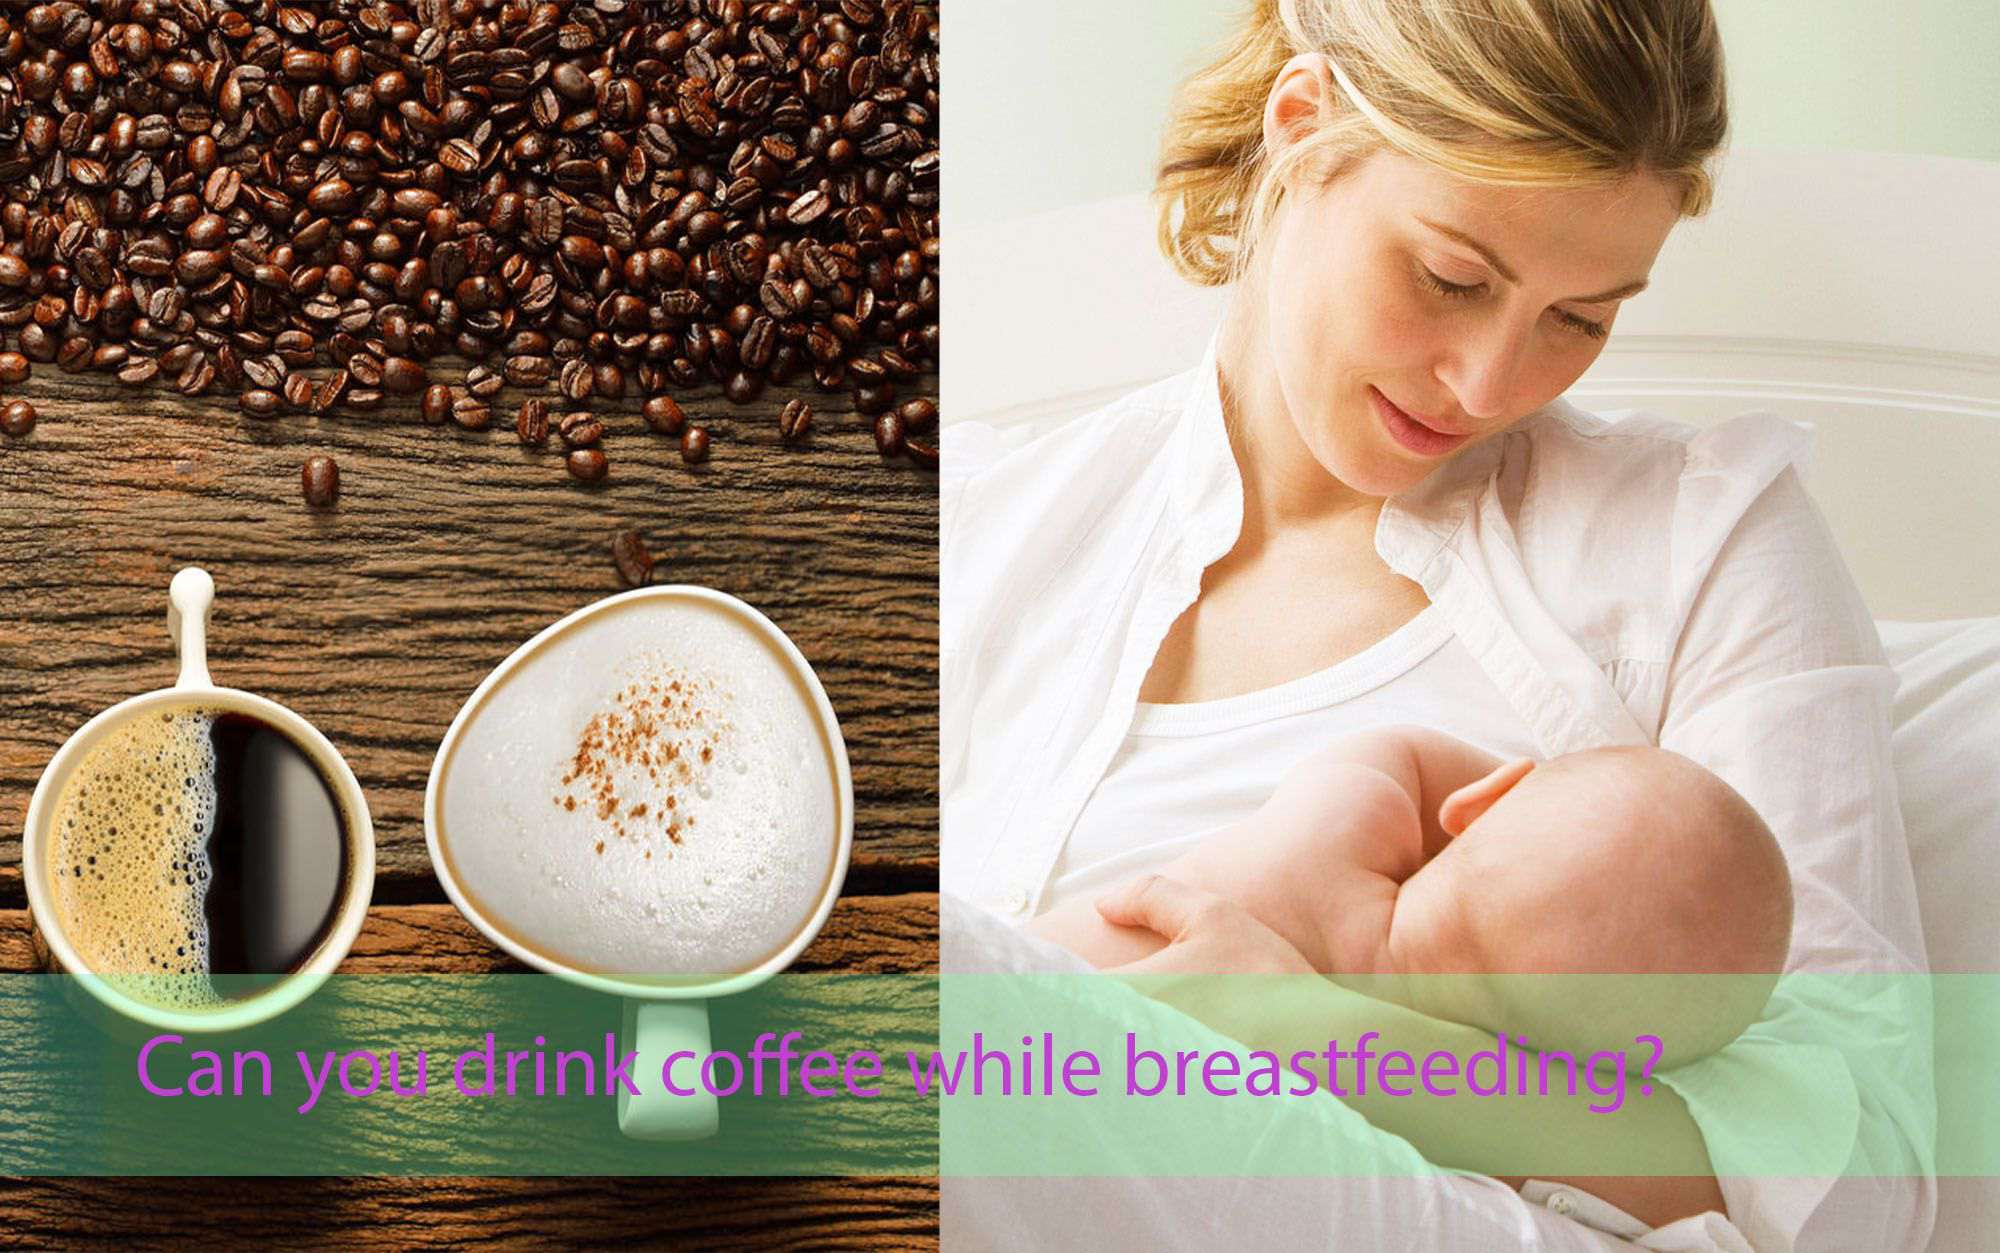 Can you drink coffee while breastfeeding